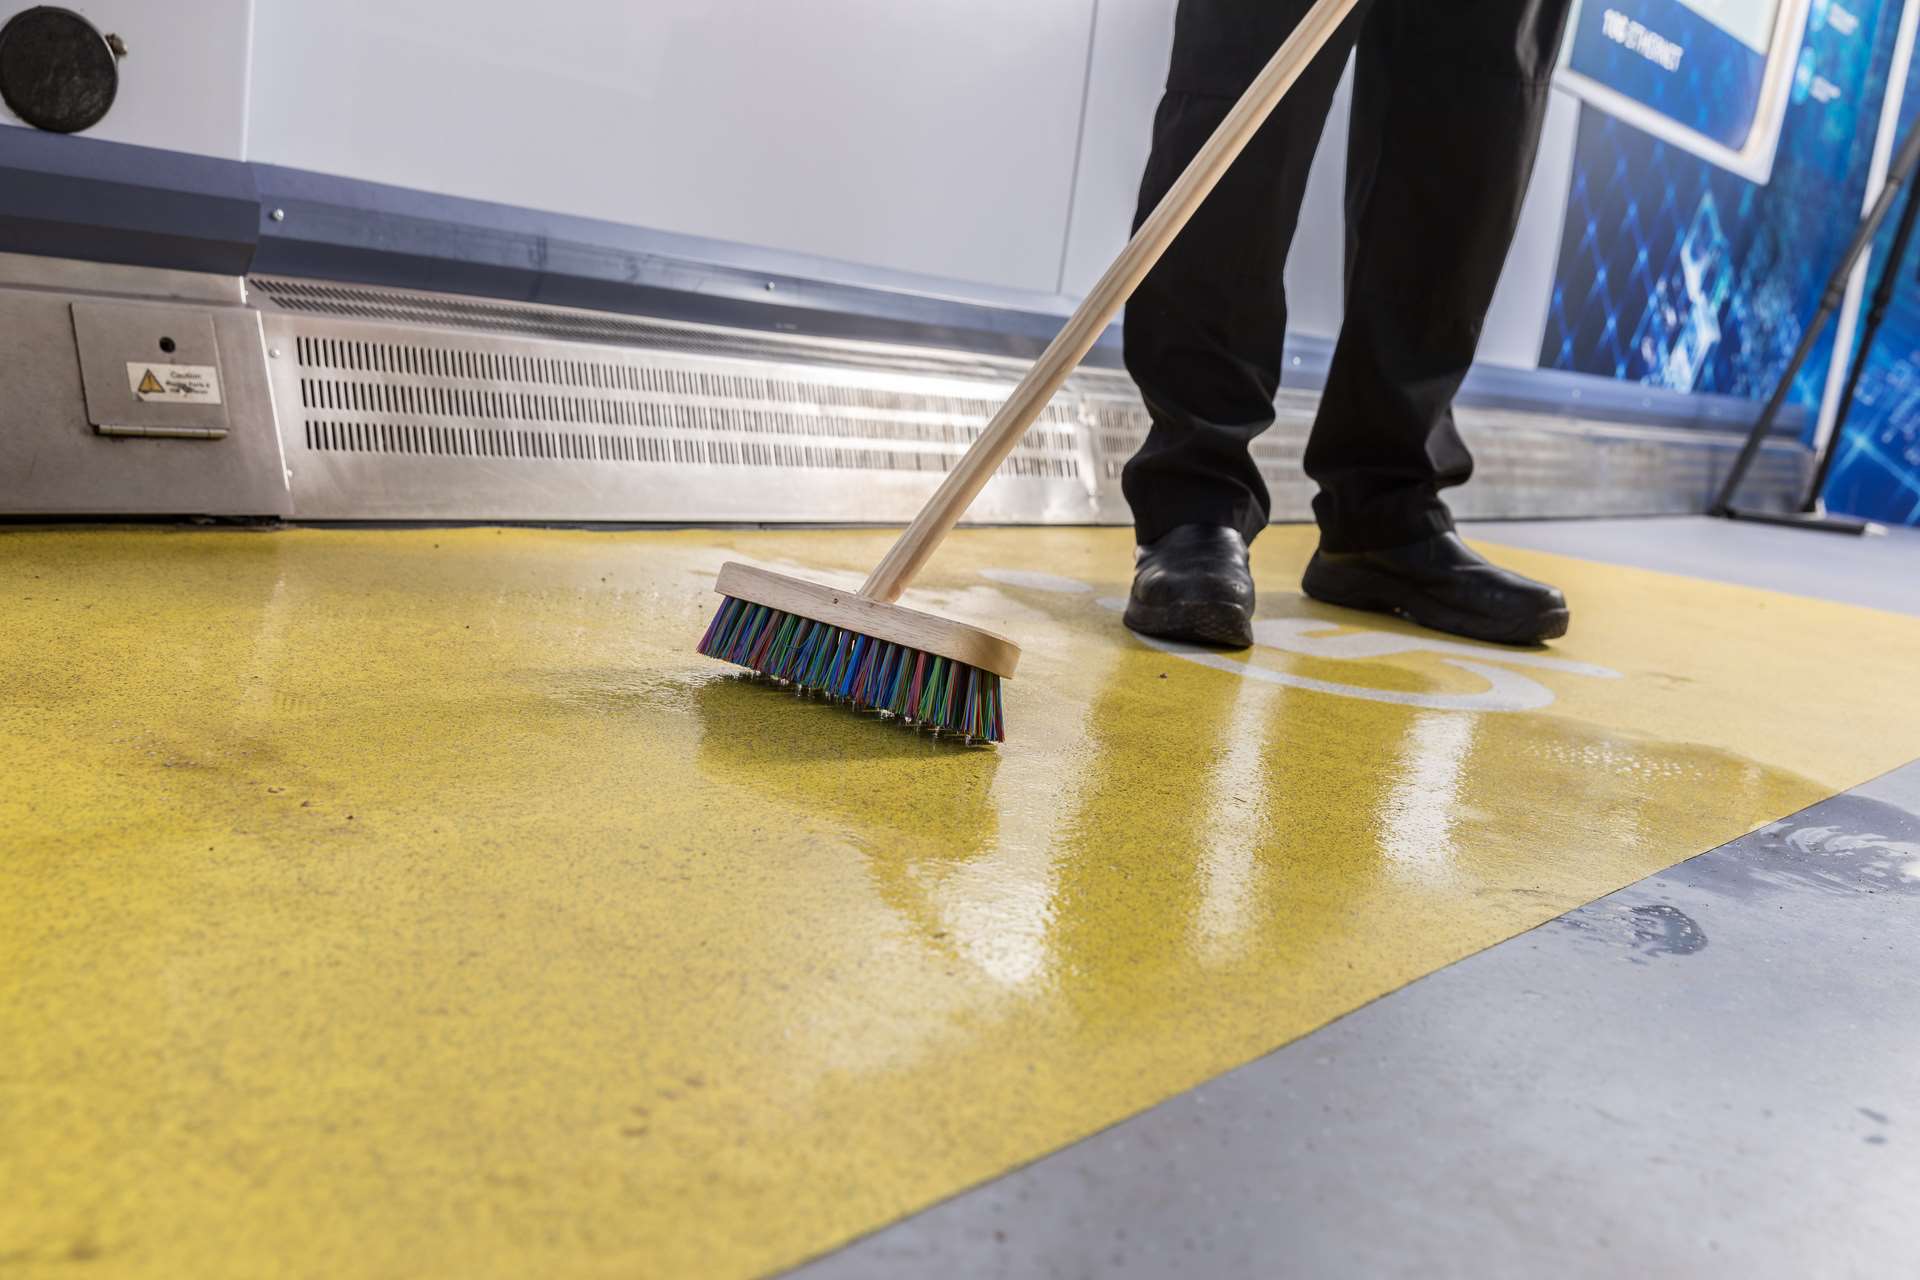 An Autoglym engineer performing a scrub with a deck brush as part of a deep clean on Altro Transflor Tungsten and Altro Transflor Motus